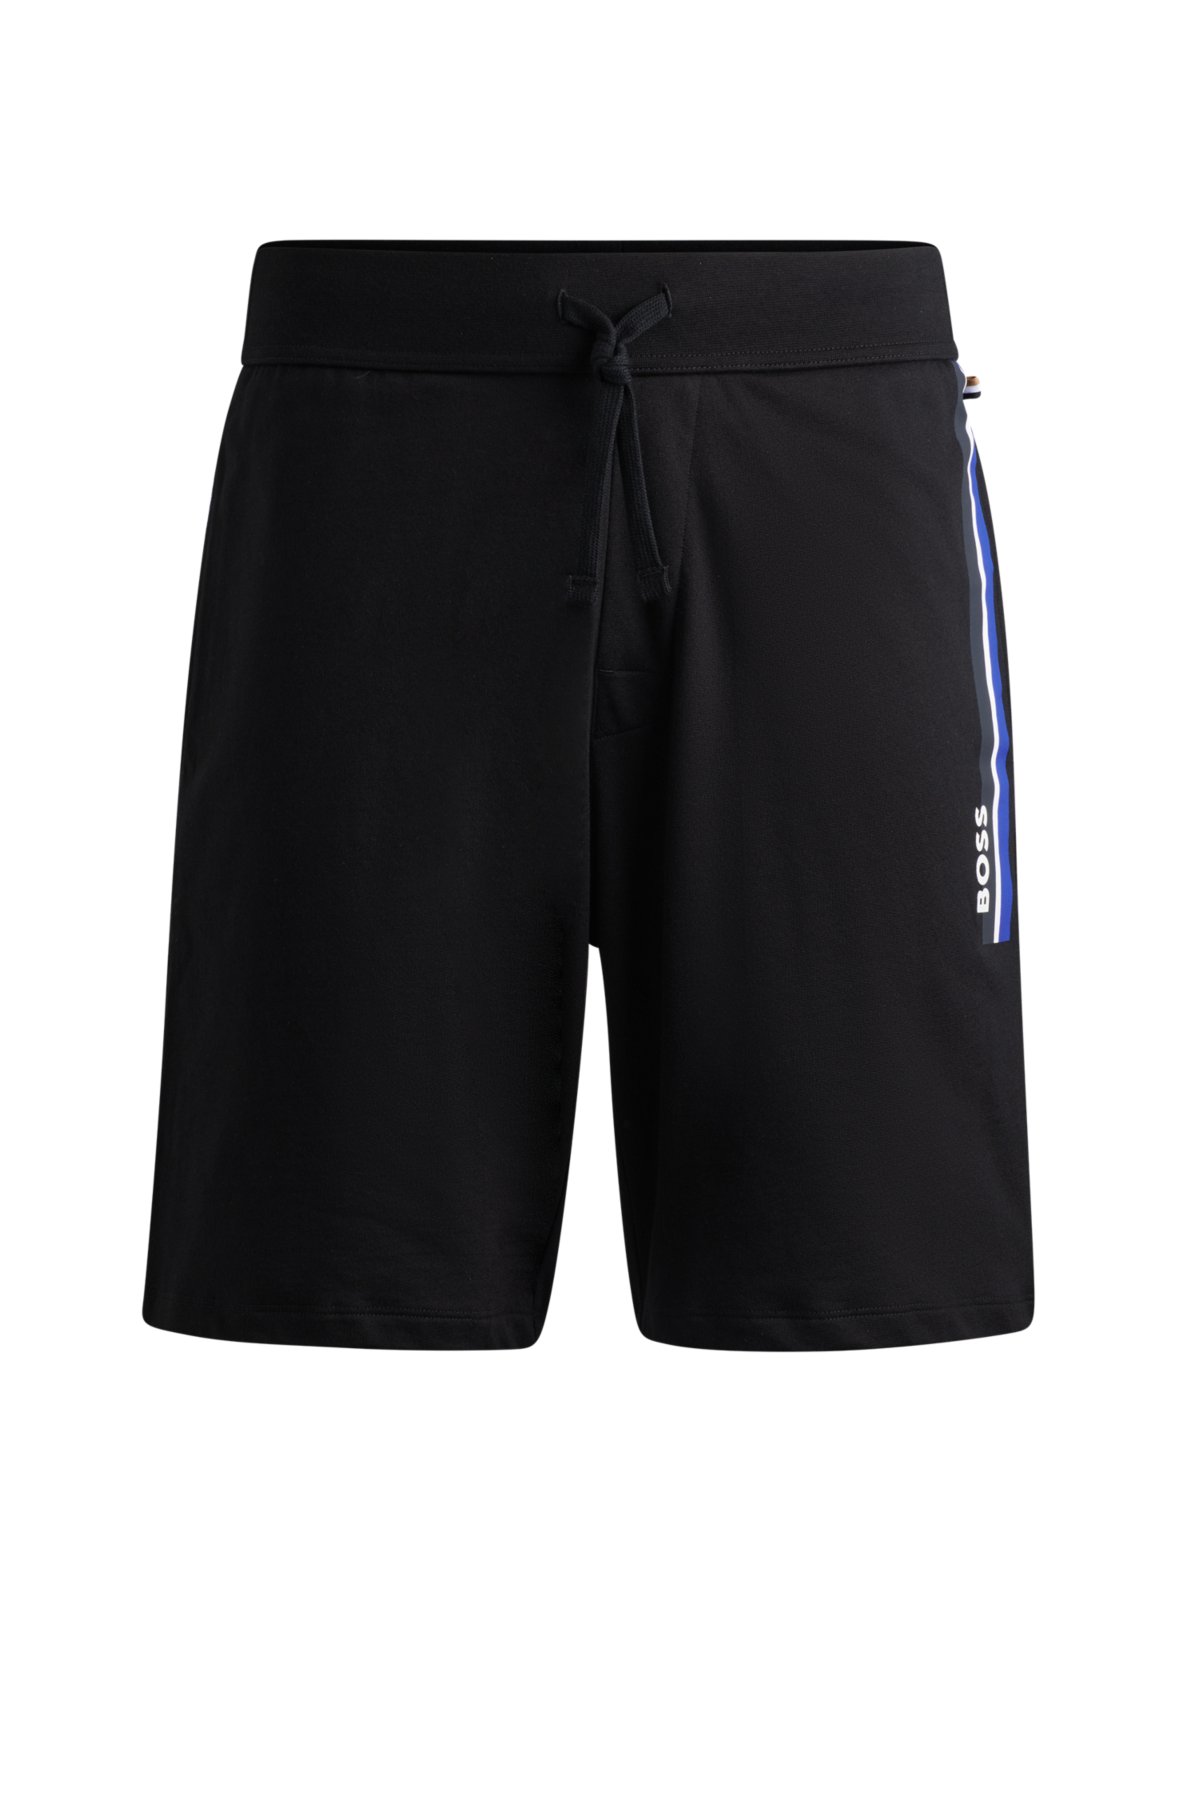 Drawstring shorts in French terry with stripes and logo, Black